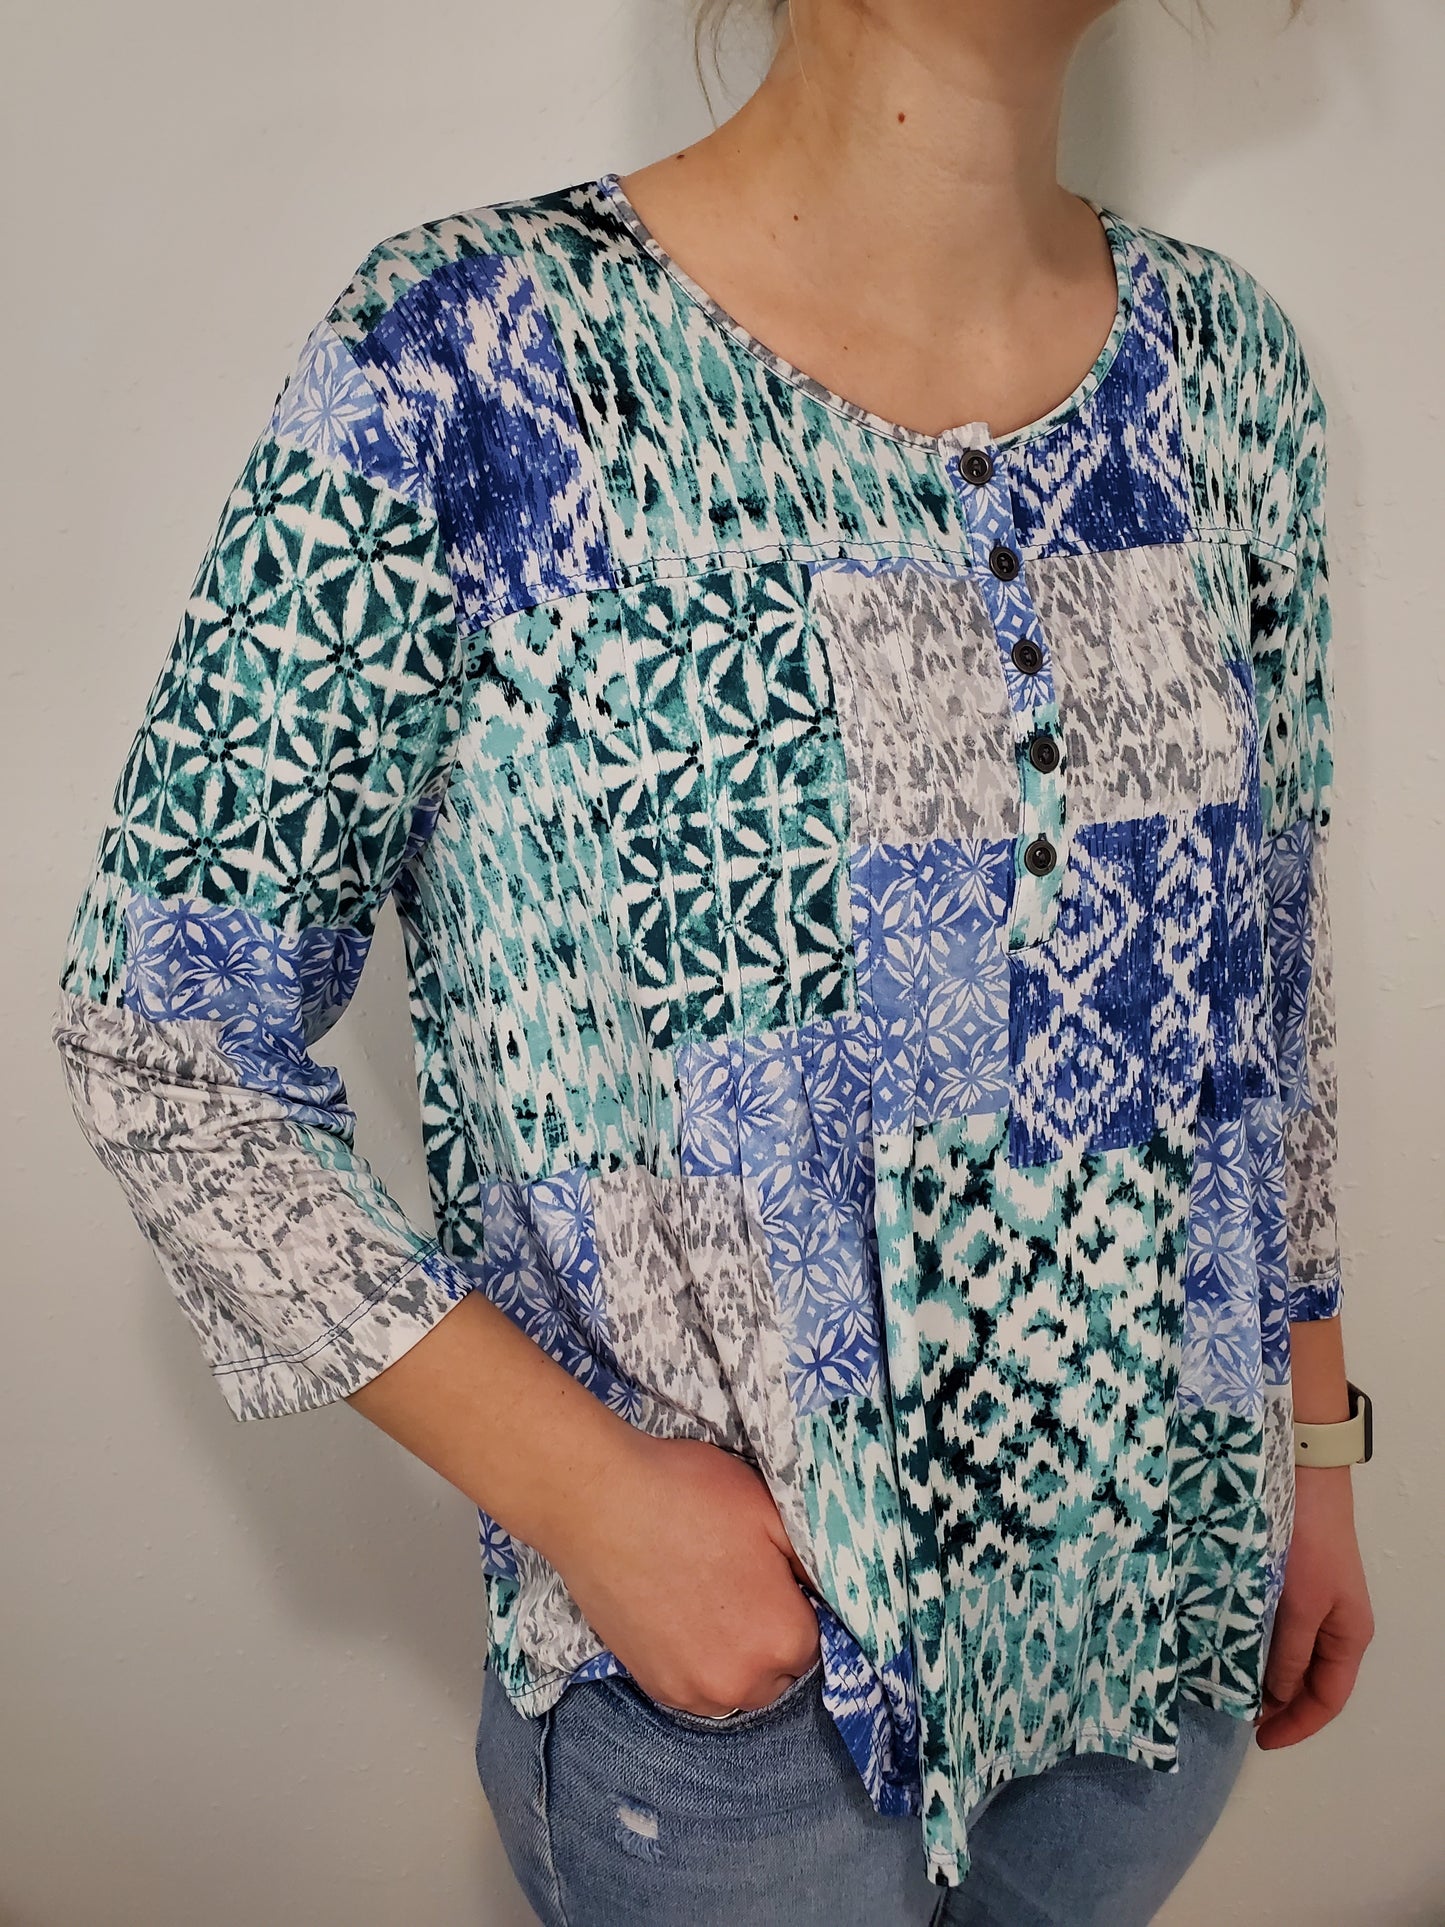 KELLY ABSTRACT PRINT TOP - BLUE MULTI